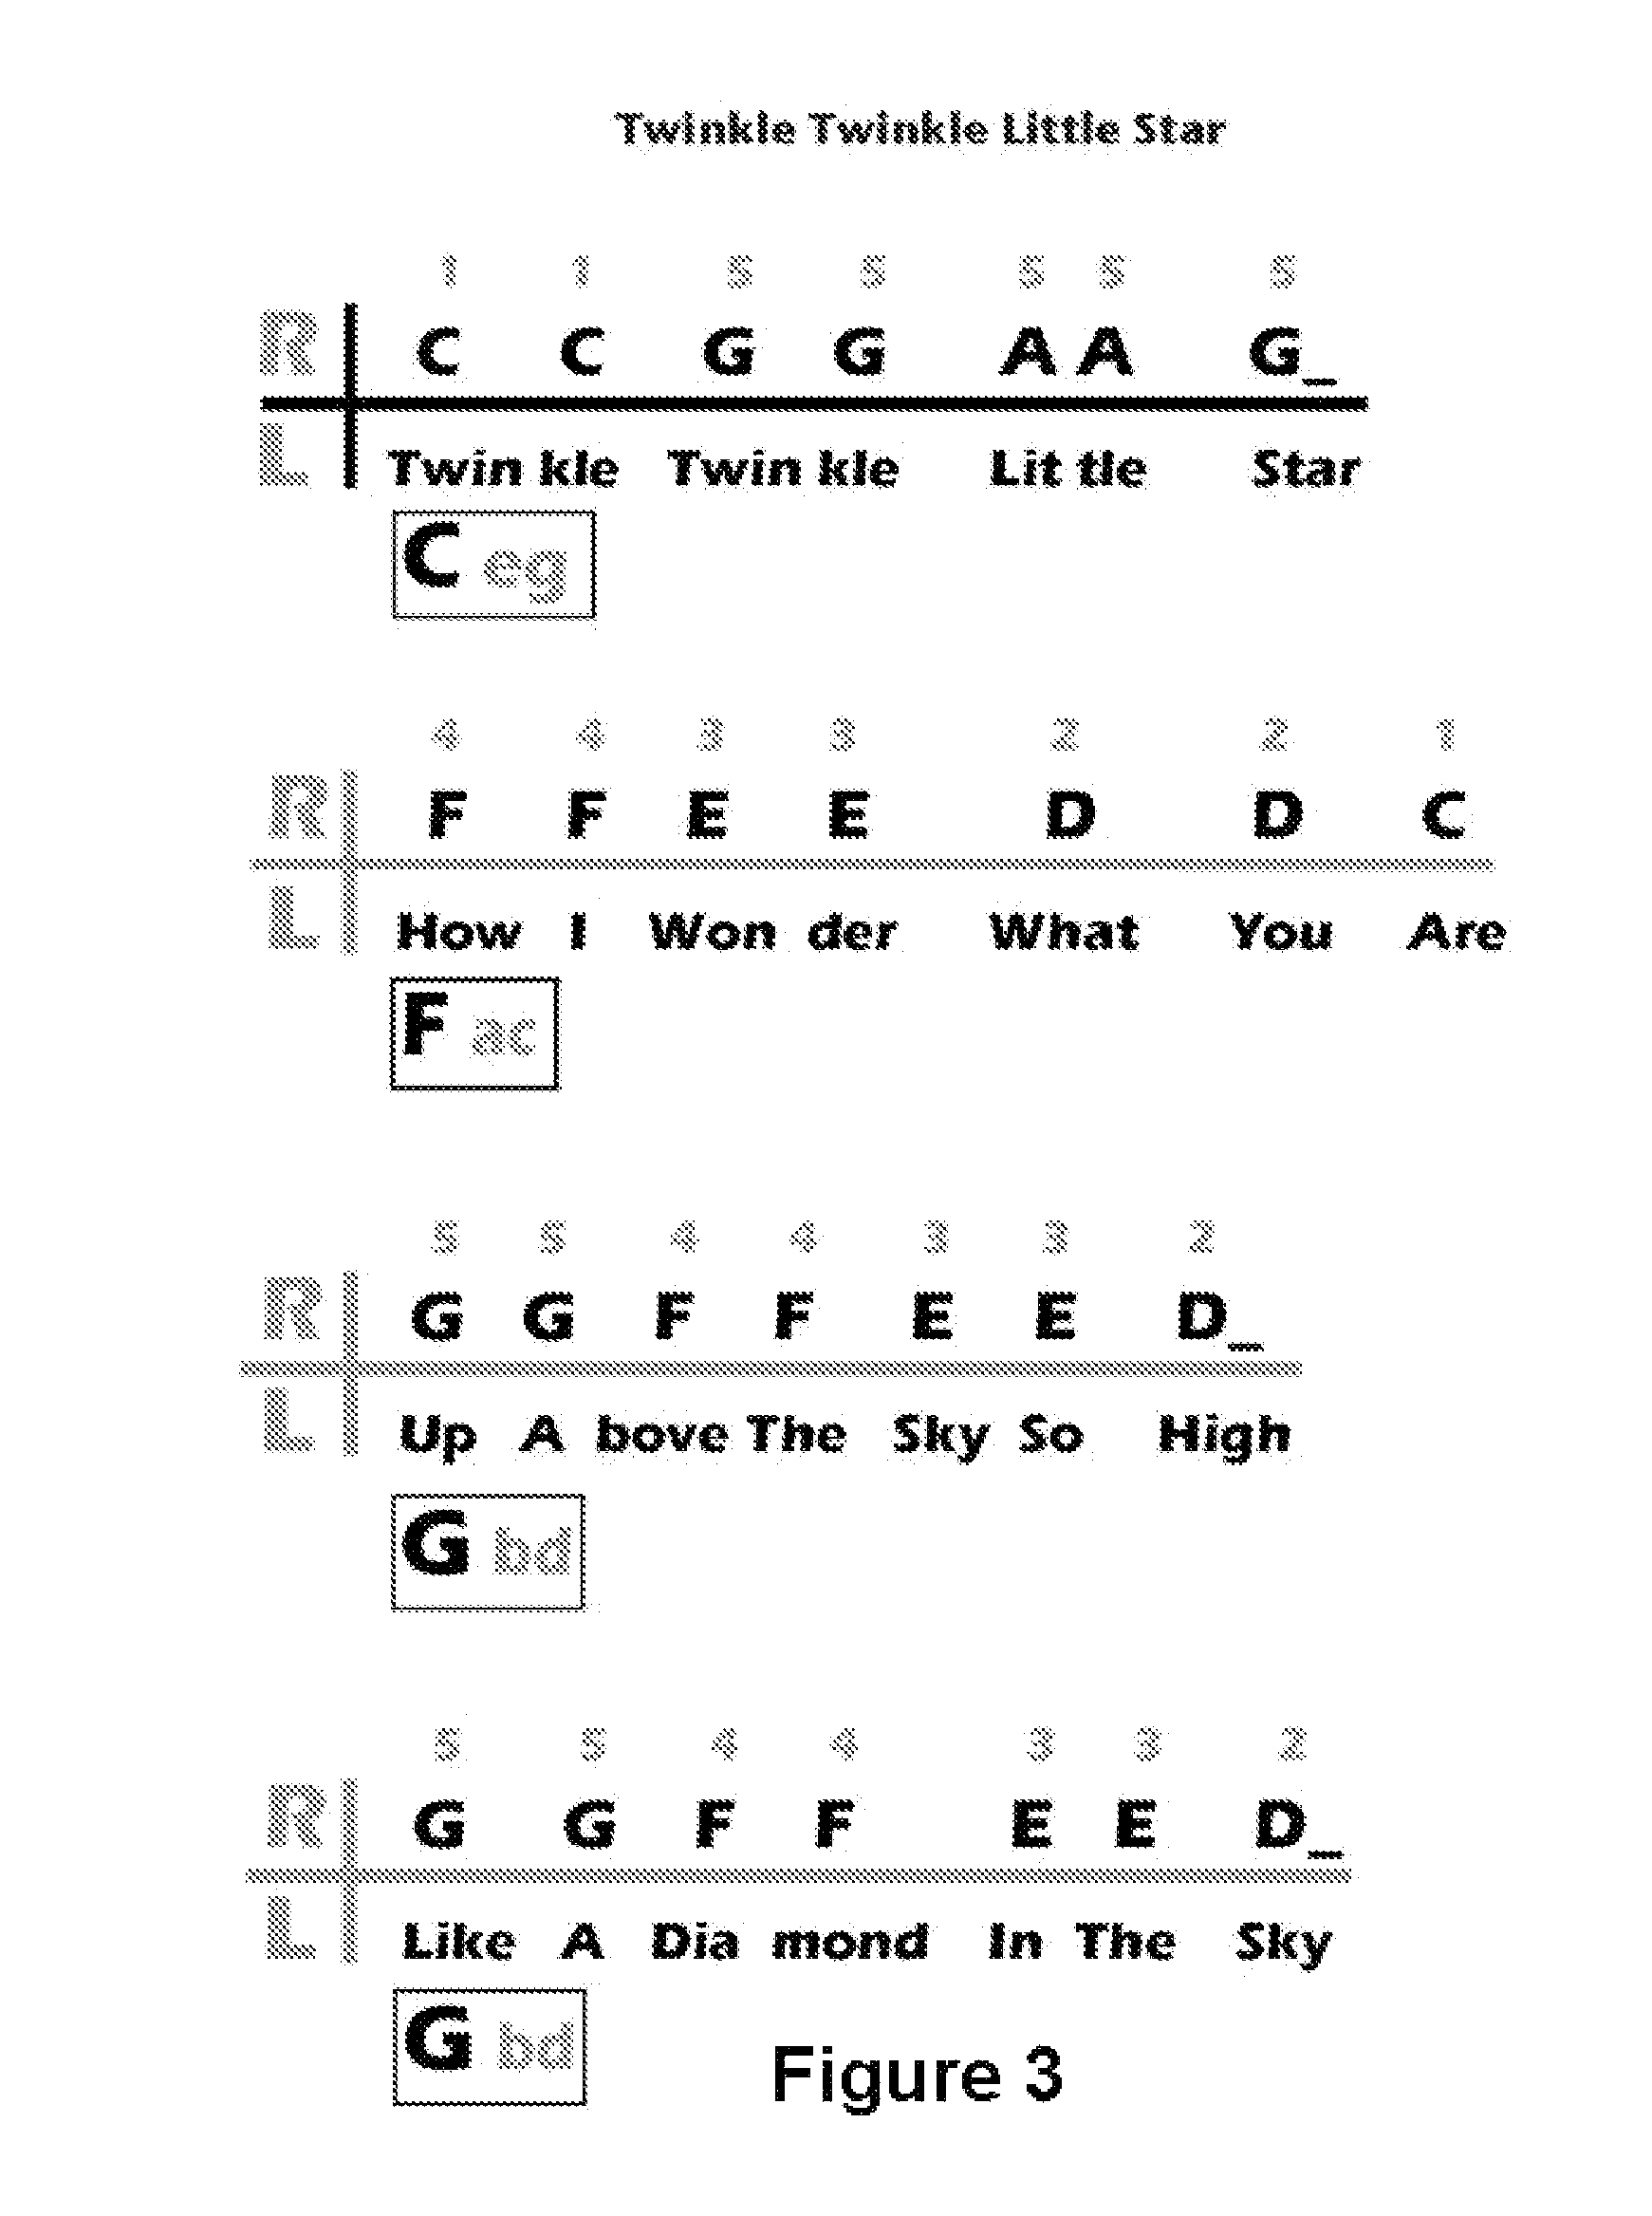 Simplified sheet music device and method